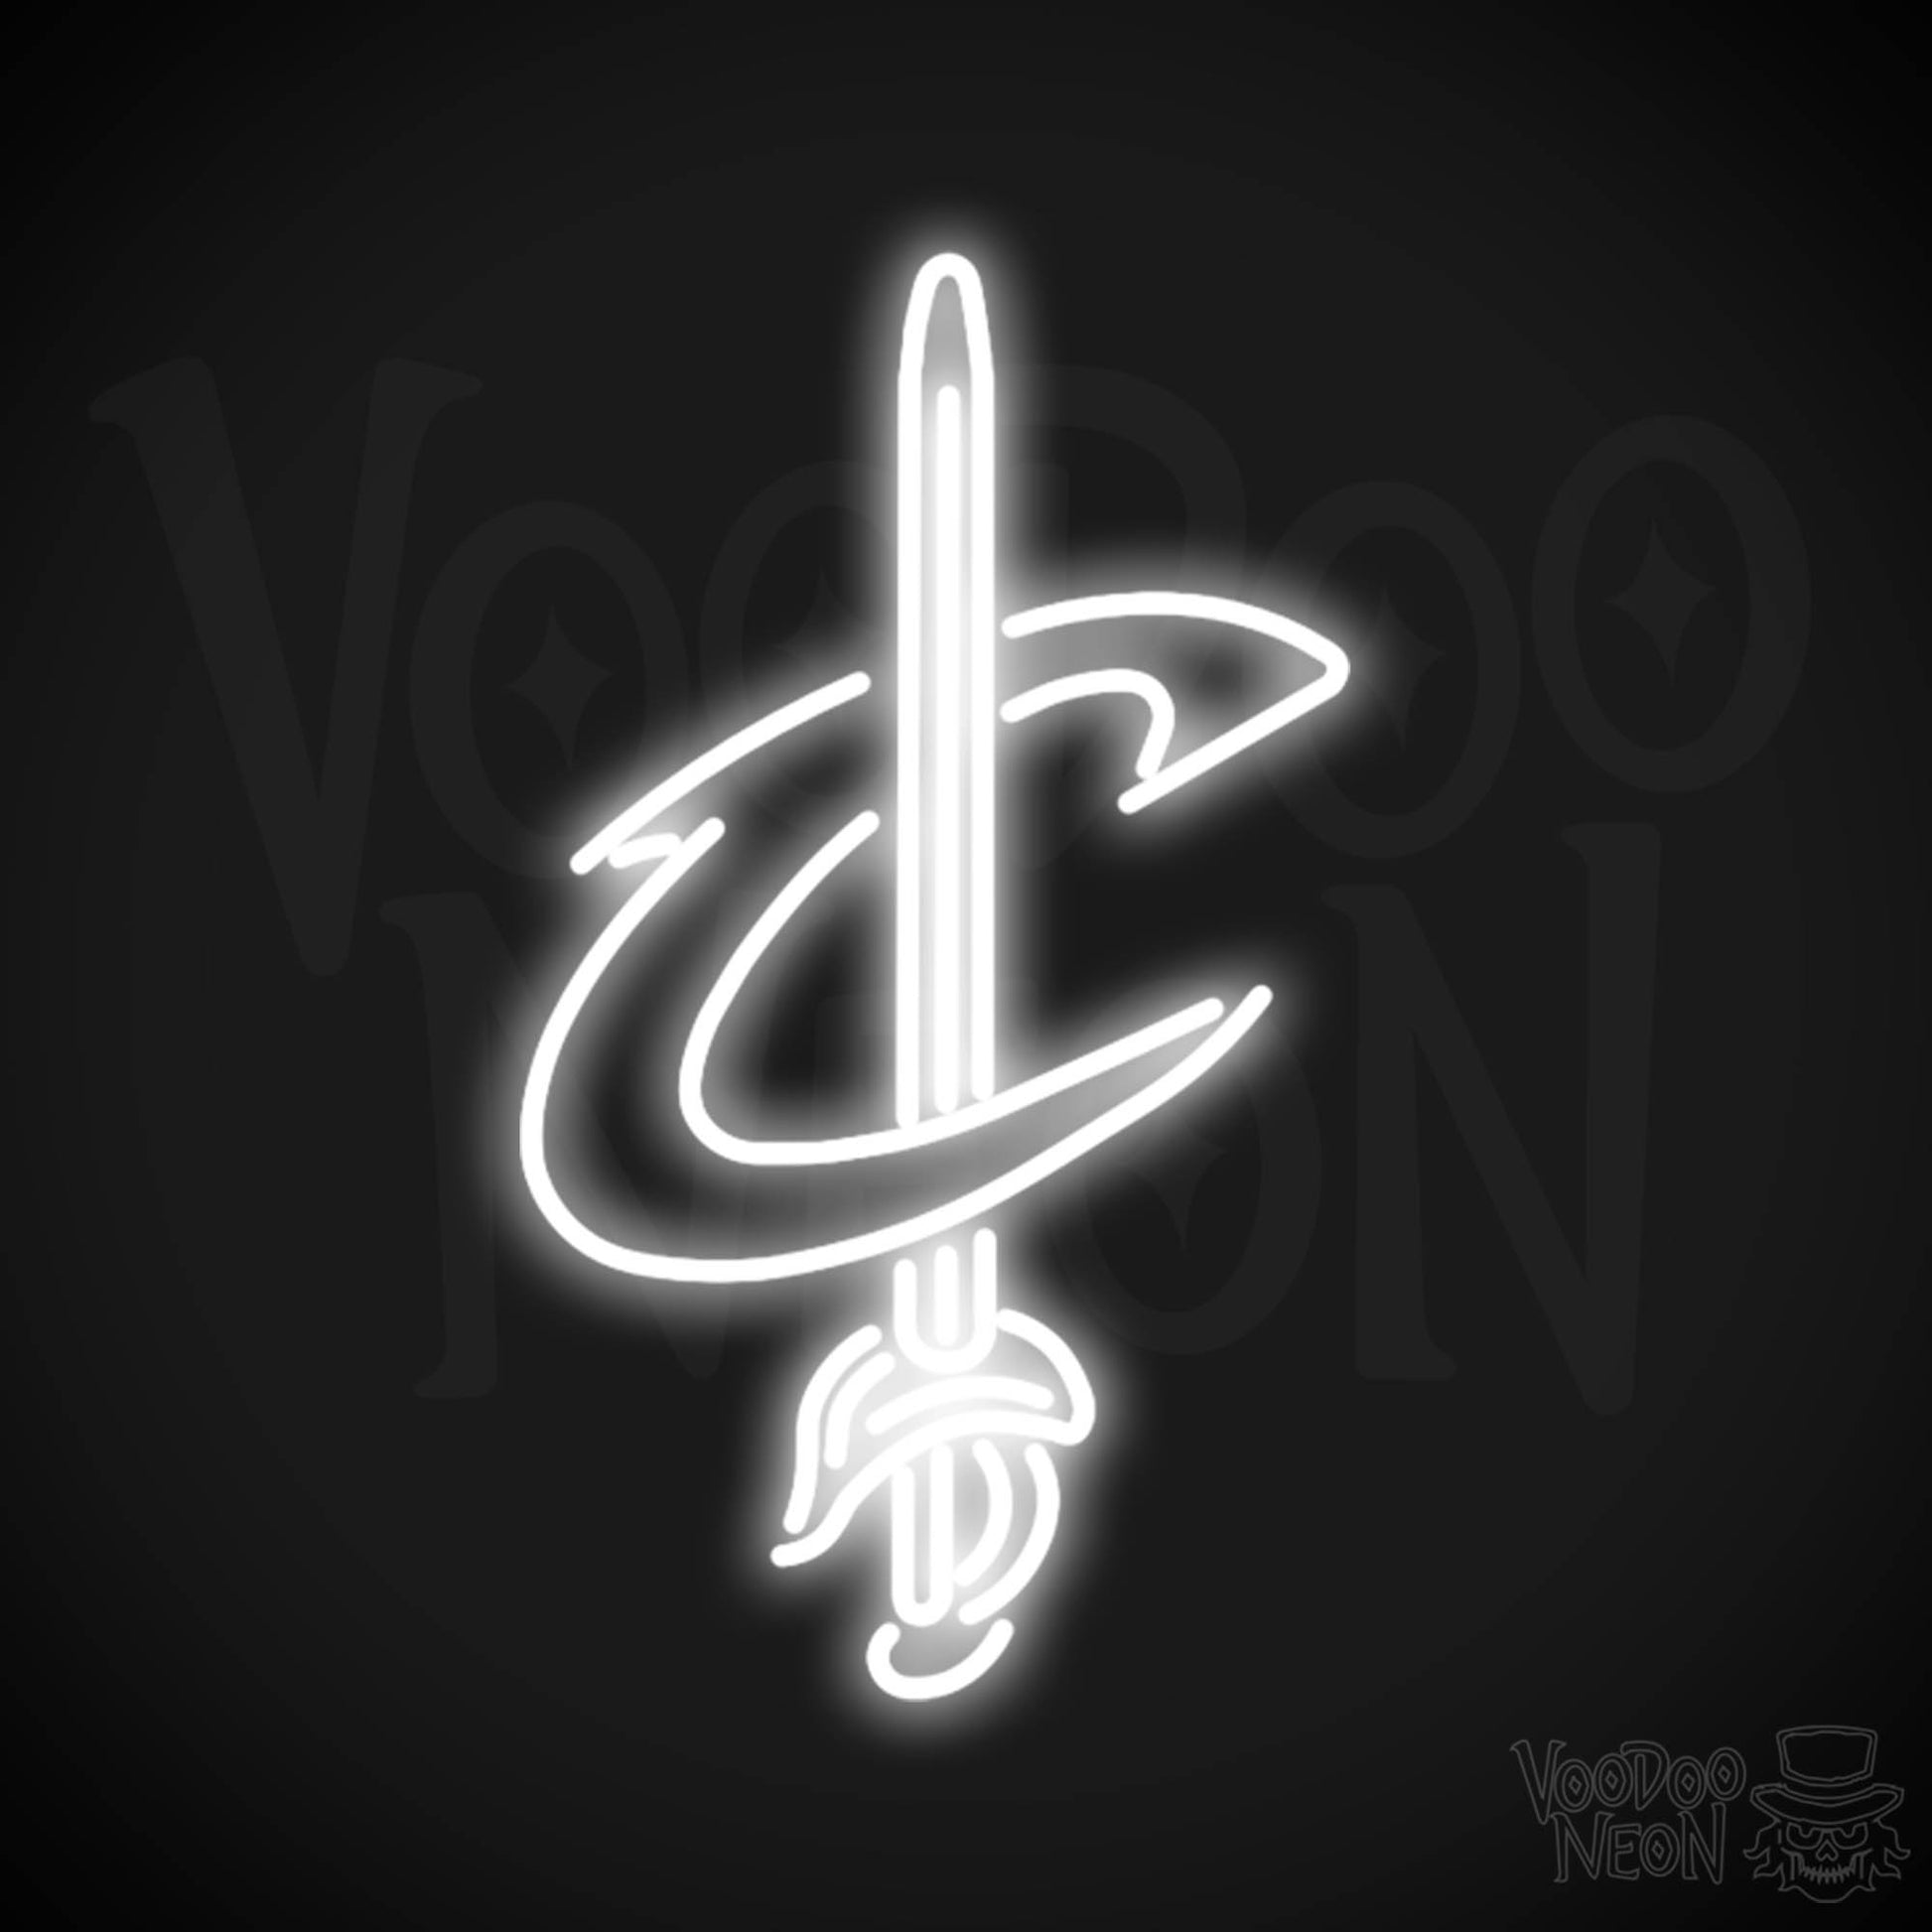 Cleveland Cavaliers Neon Sign - Cleveland Cavaliers Sign - Neon Cavaliers Wall Art - Color White